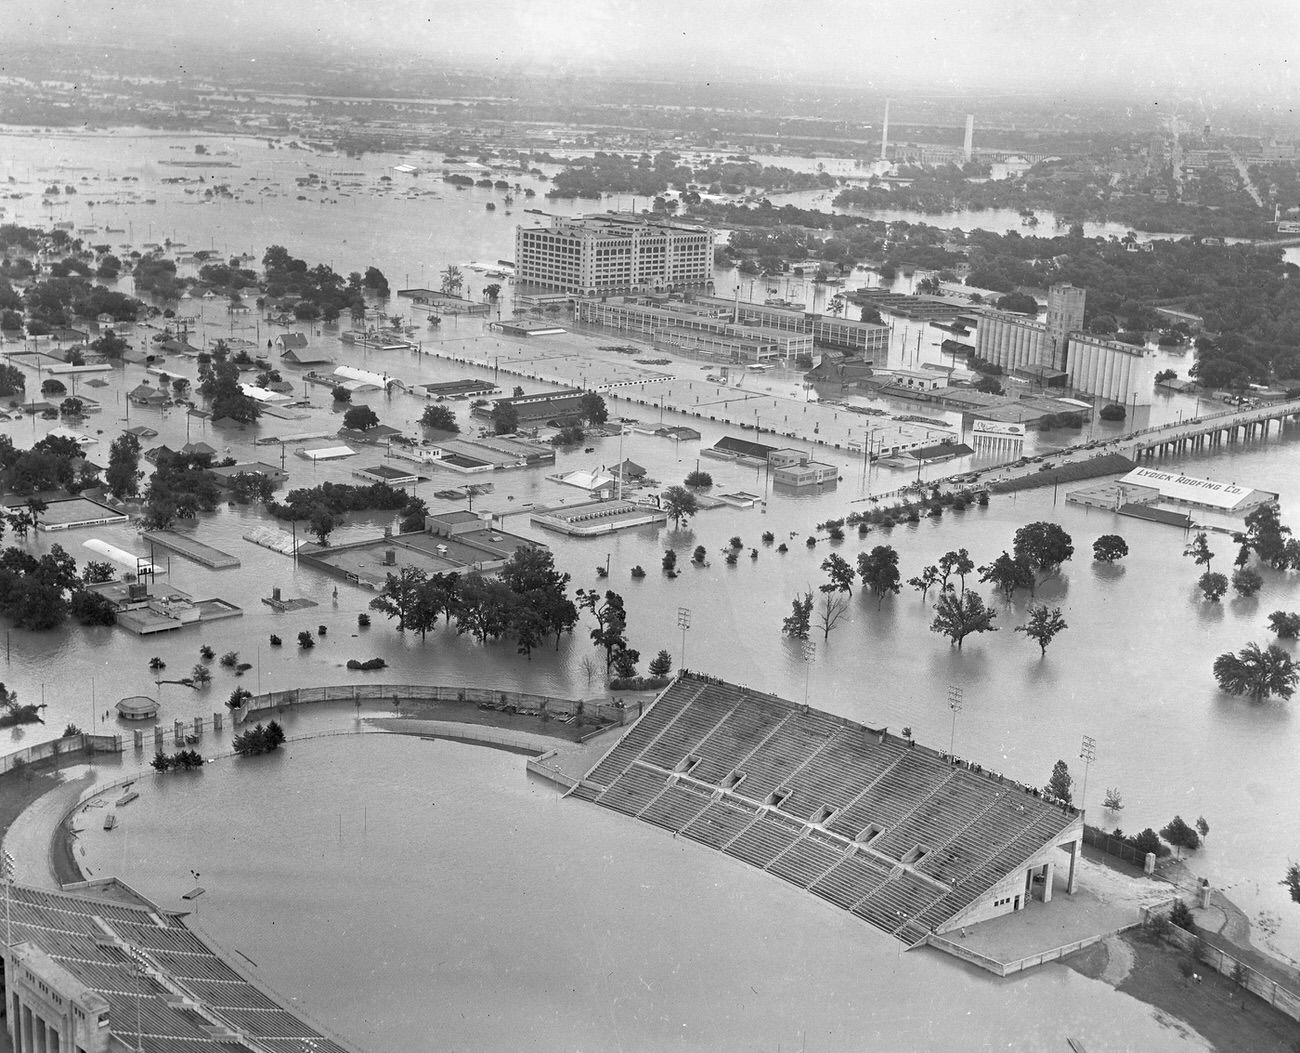 Fort Worth flood of 1949 showing 7th Street under water. The large Montgomery Ward building received extensive damage.